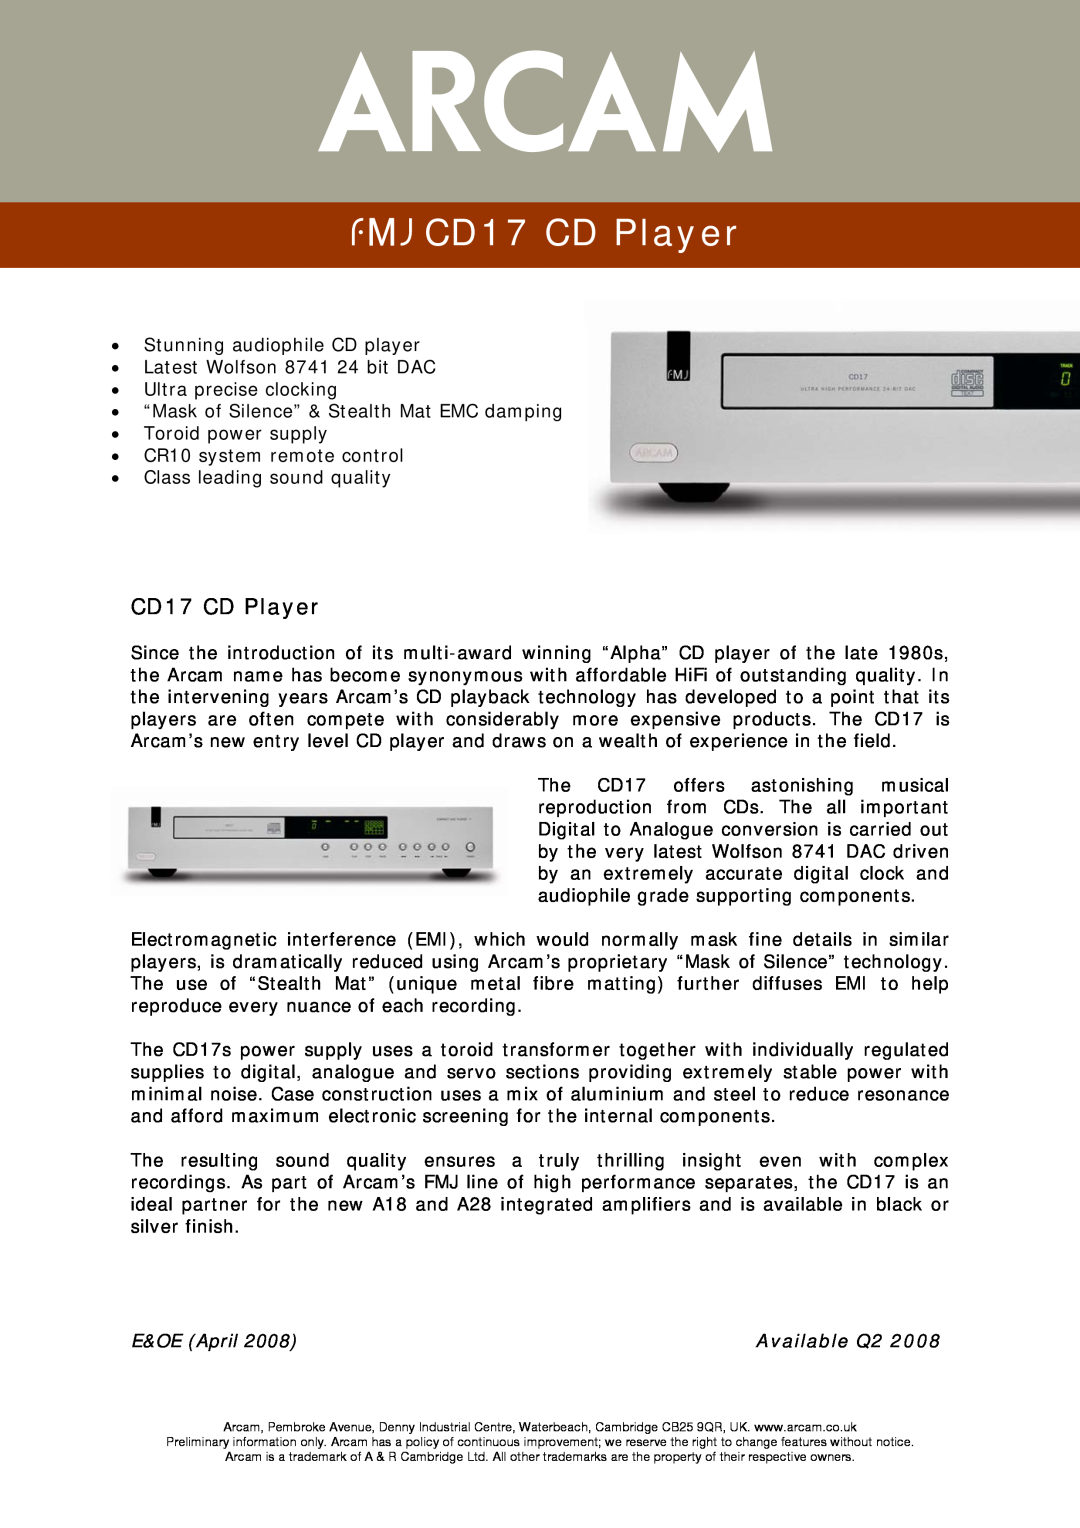 Arcam FMJ CD17 manual 23425, fCD17 CD Player, New product information DV139 DVD player, E&OE April, Available Q2 